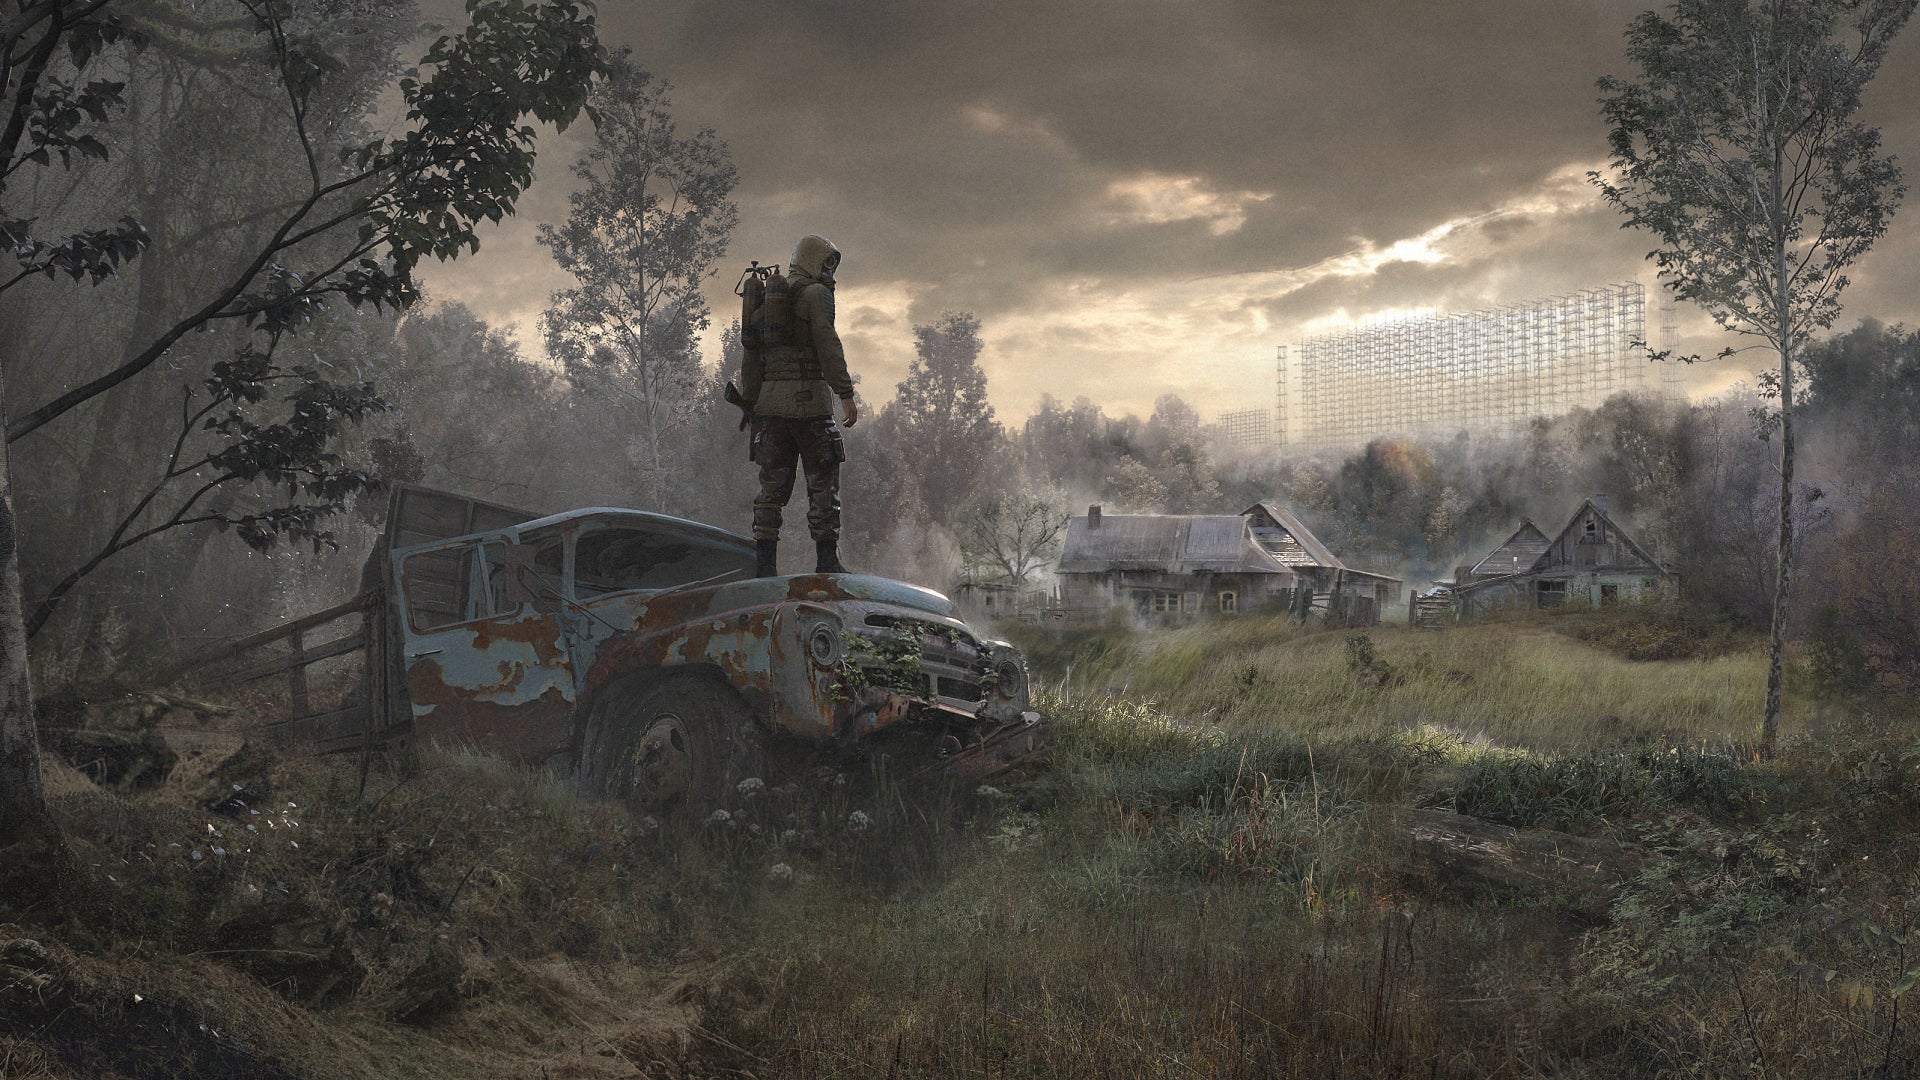 Stalker 2: Heart of Chornobyl artwork depicts a player standing atop a car by what we can assume to be the Chernobyl Exclusion Zone, or nearby.